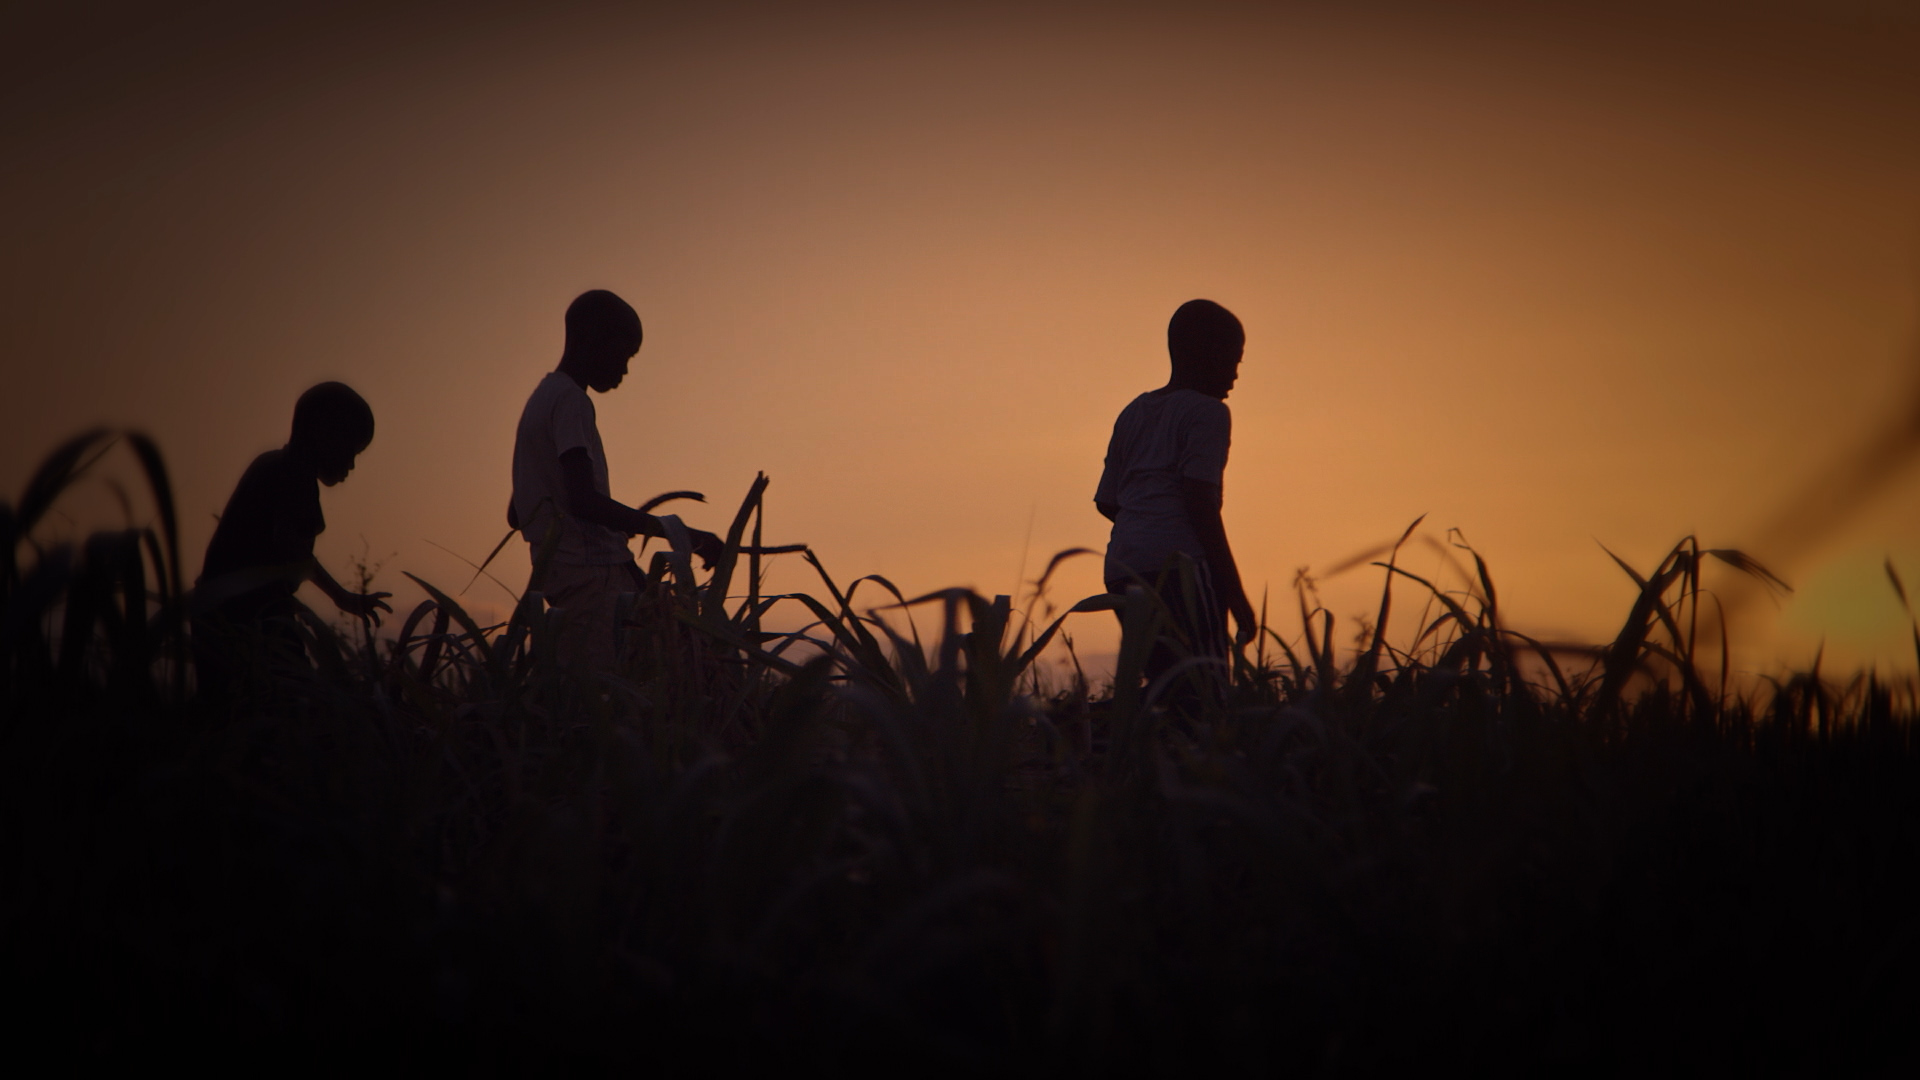 A still from Stateless (Apátrida) captures the silhouettes of three boys walking through a field of grass with a sunset behind them.